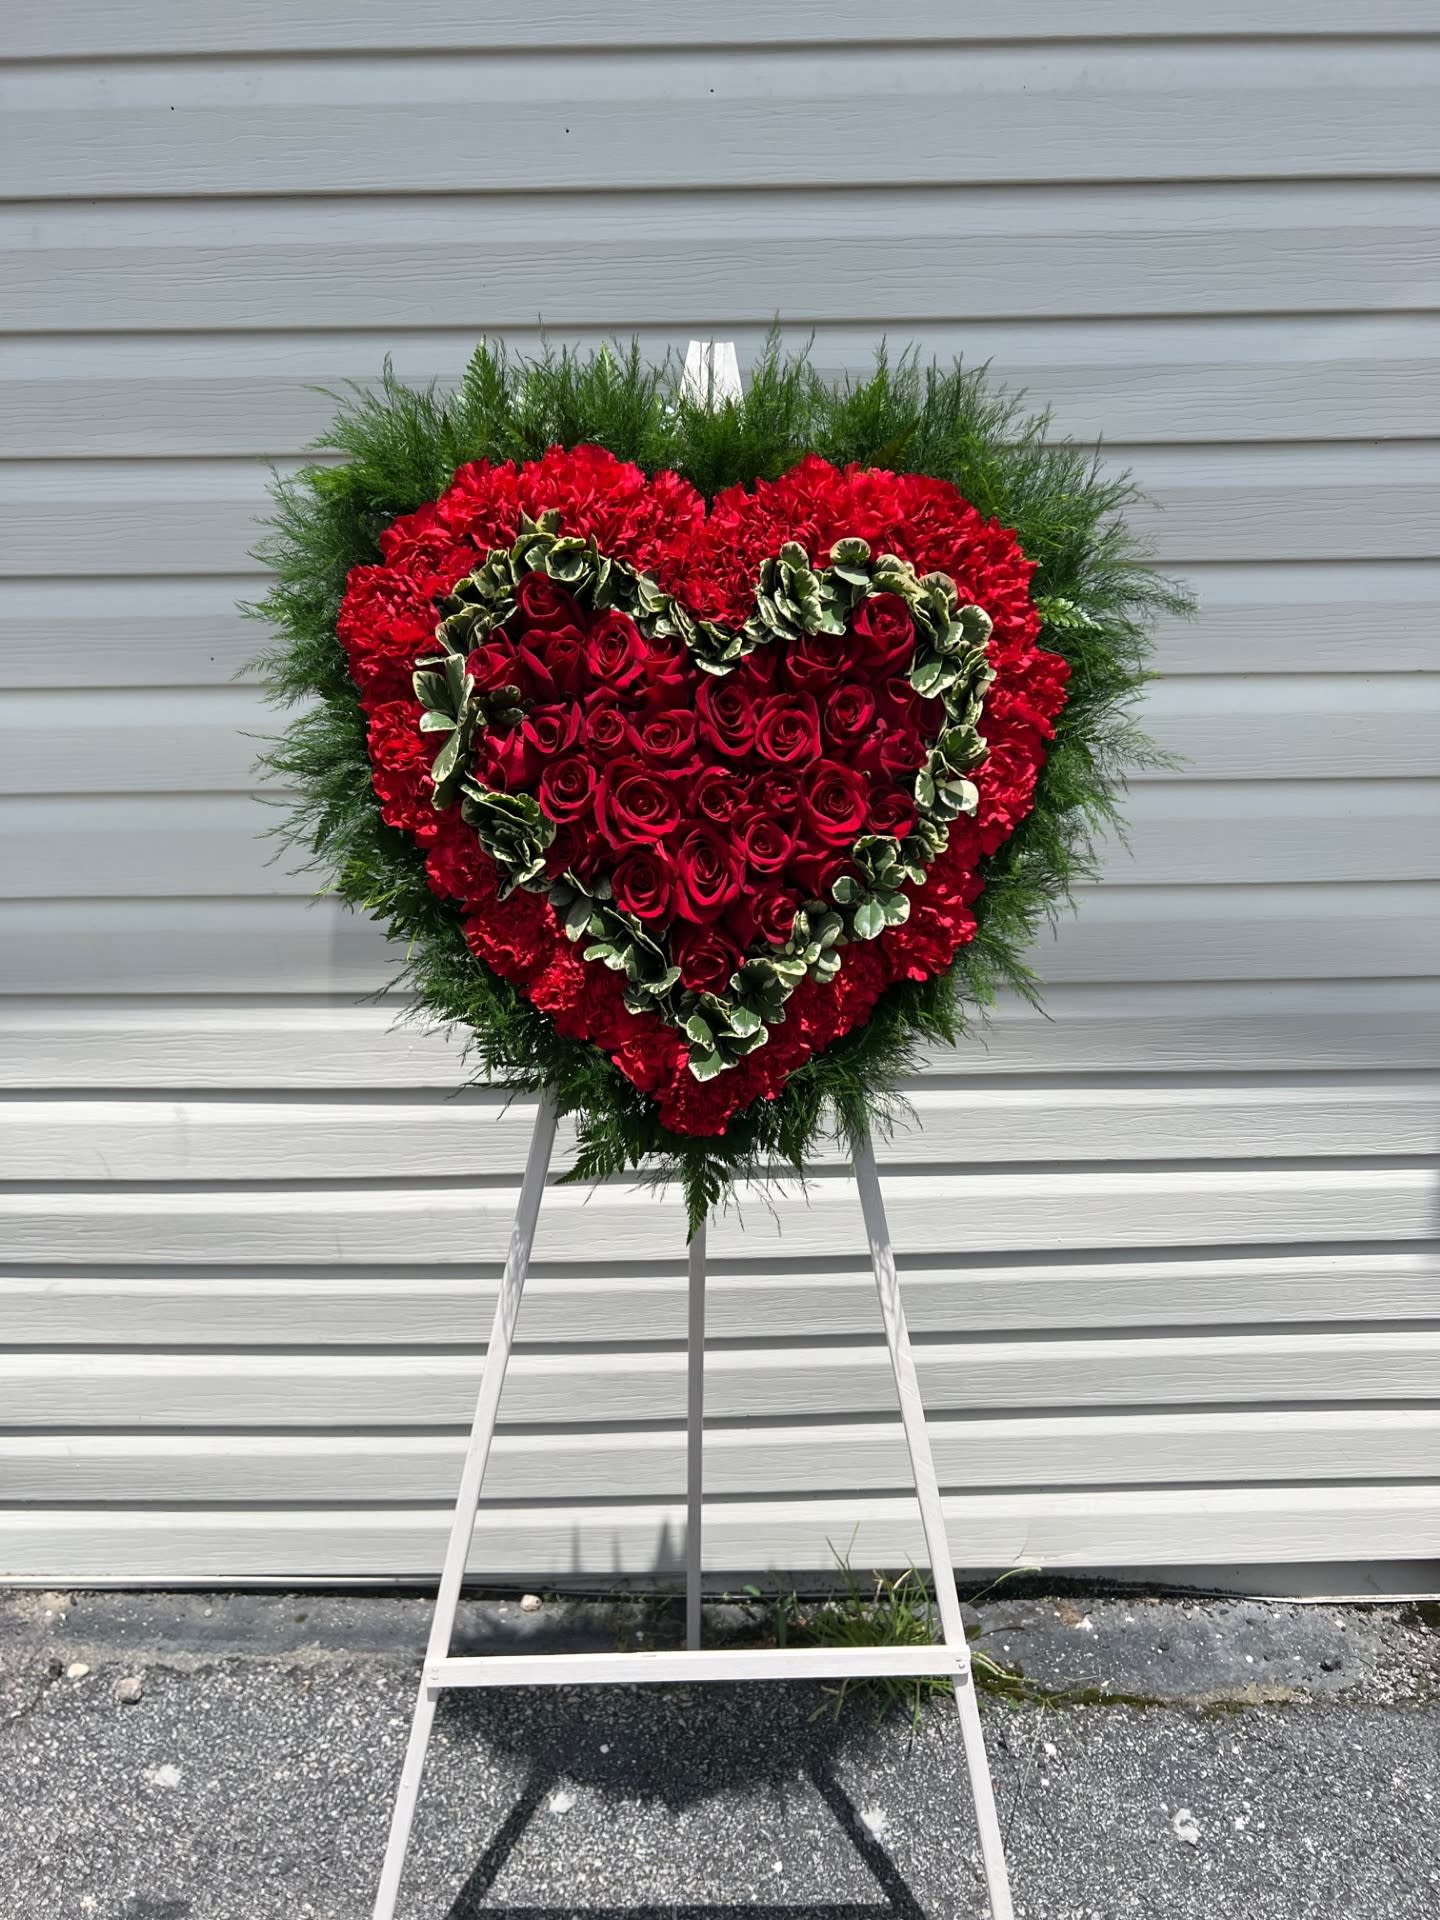 Majestic Heart - Remember a loved one's generous heart with this red arrangement in a classic heart shape a declaration of eternal love and devotion.  18'' heart form  FCF-T225-1A